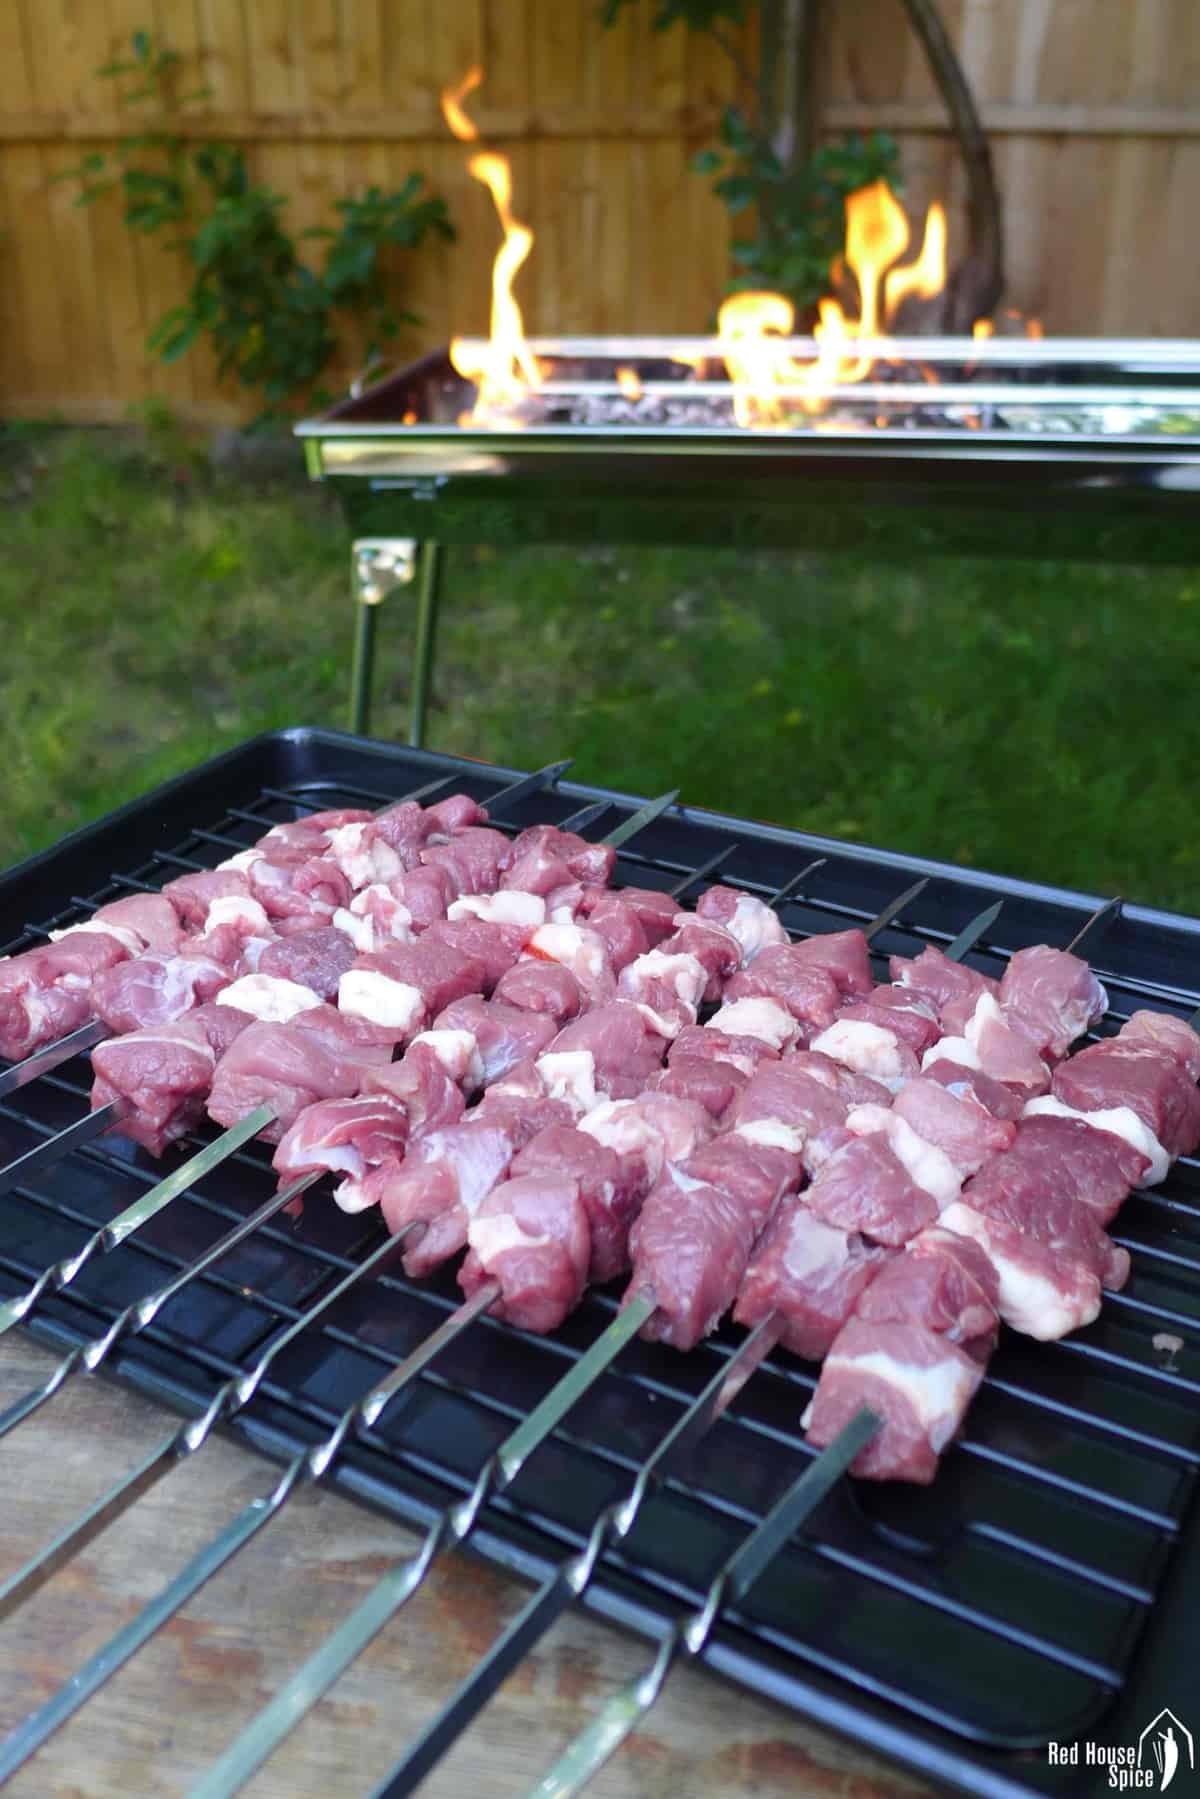 Raw lamb on skewers with a rectangle grill in the background